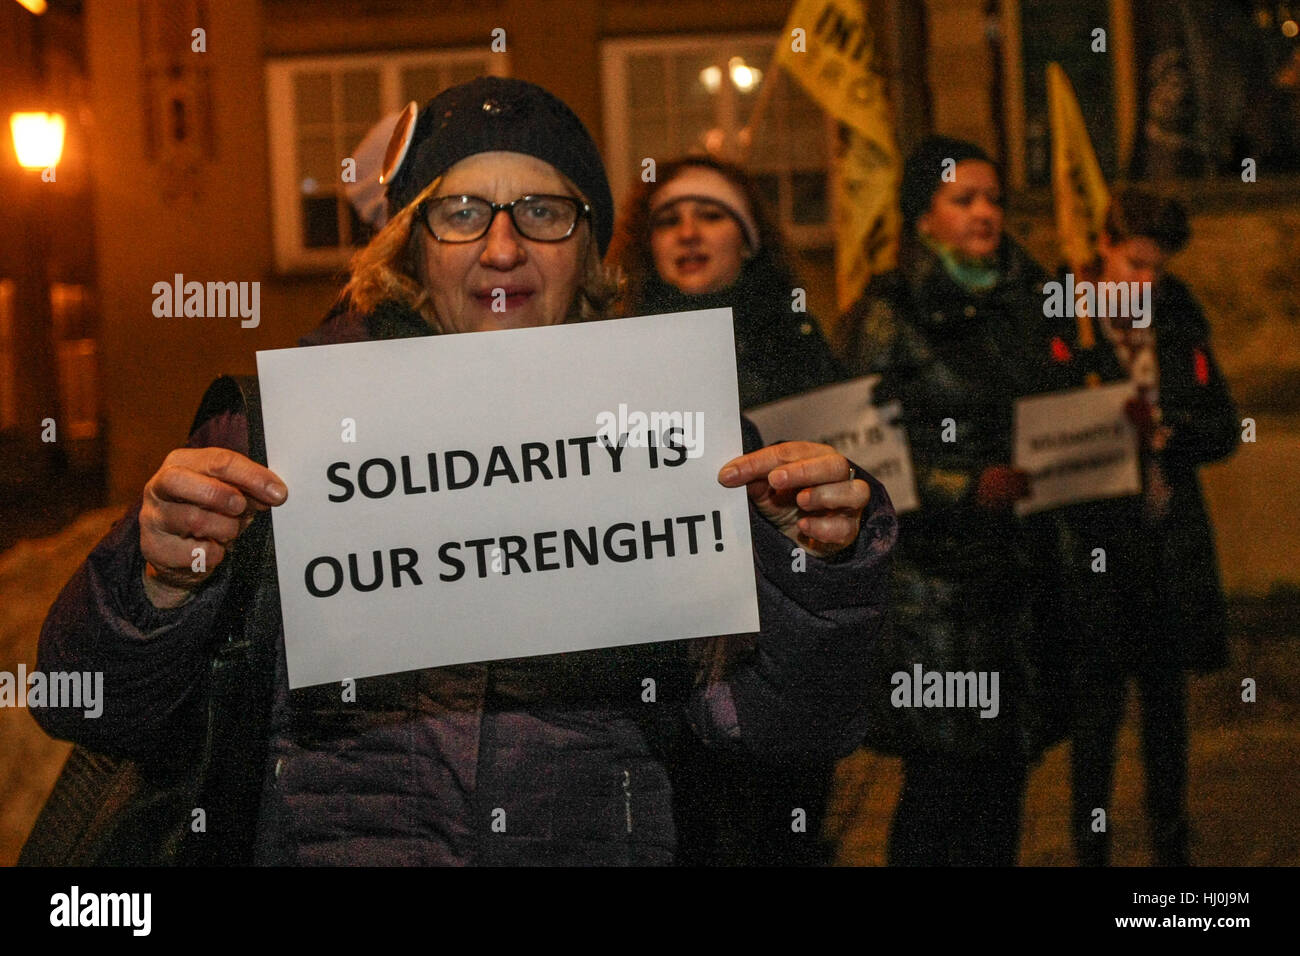 Gdansk, Poland. 21st January, 2017. Demonstrators with equality slogans on posters are seen on January 21st, 2017 in Gdansk, Poland. Polish woman protest to support The Women's March on Washington which will send a bold message to new US Donald Trump administration on their first day in office, and to the world that women's rights are human rights. Credit: Michal Fludra/Alamy Live News Stock Photo